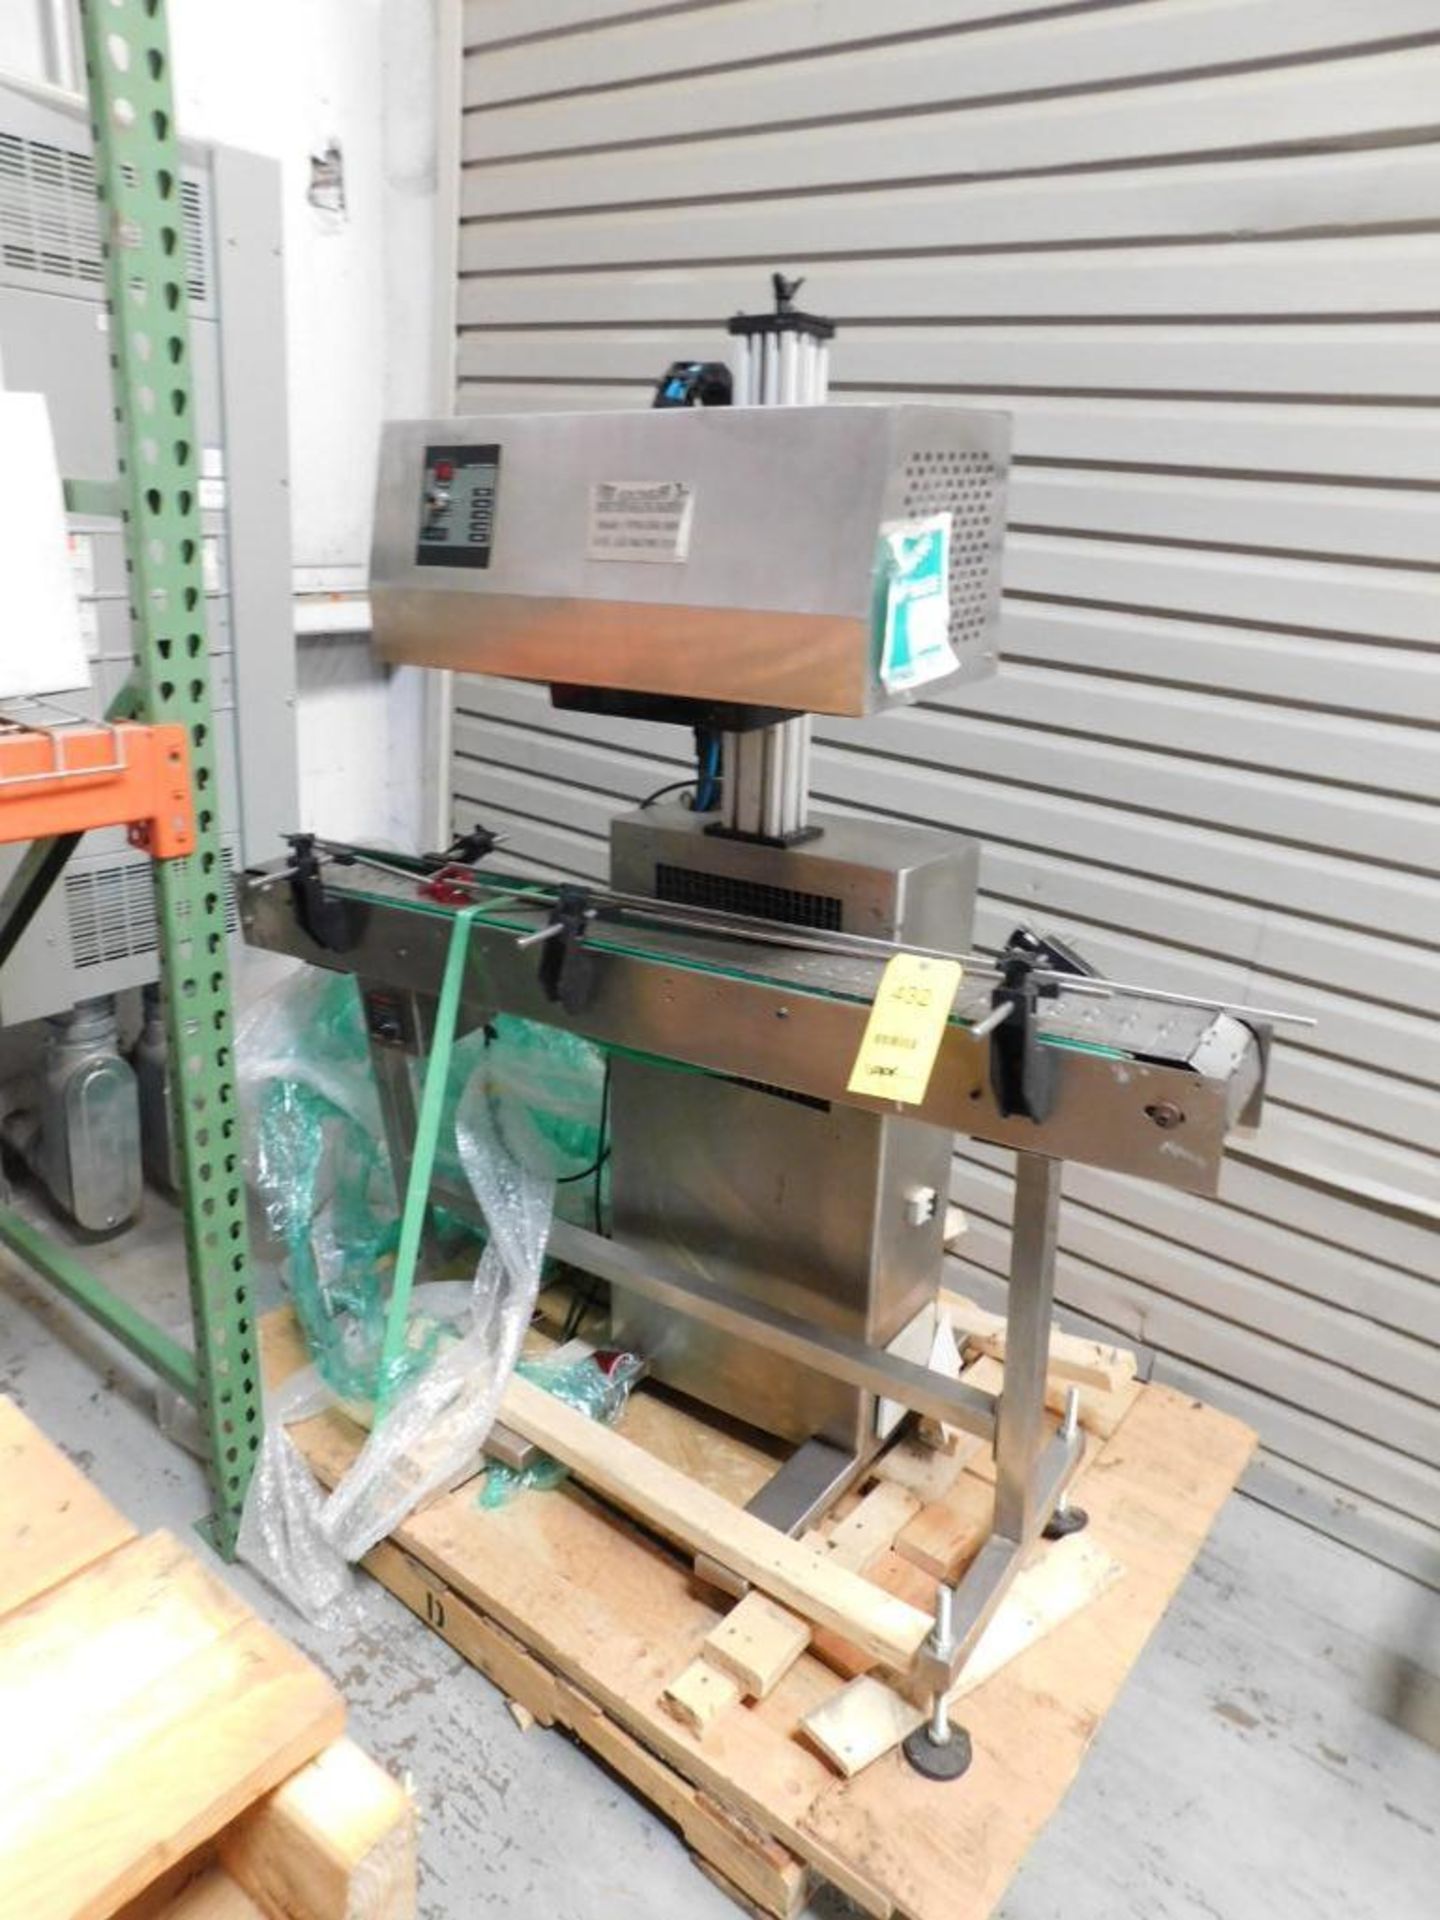 Induction Sealing Machine Model VPM-ISM 3000, S/N AN/060/001/1516 (Building 2) (LOCATED: 3201 S. ELM